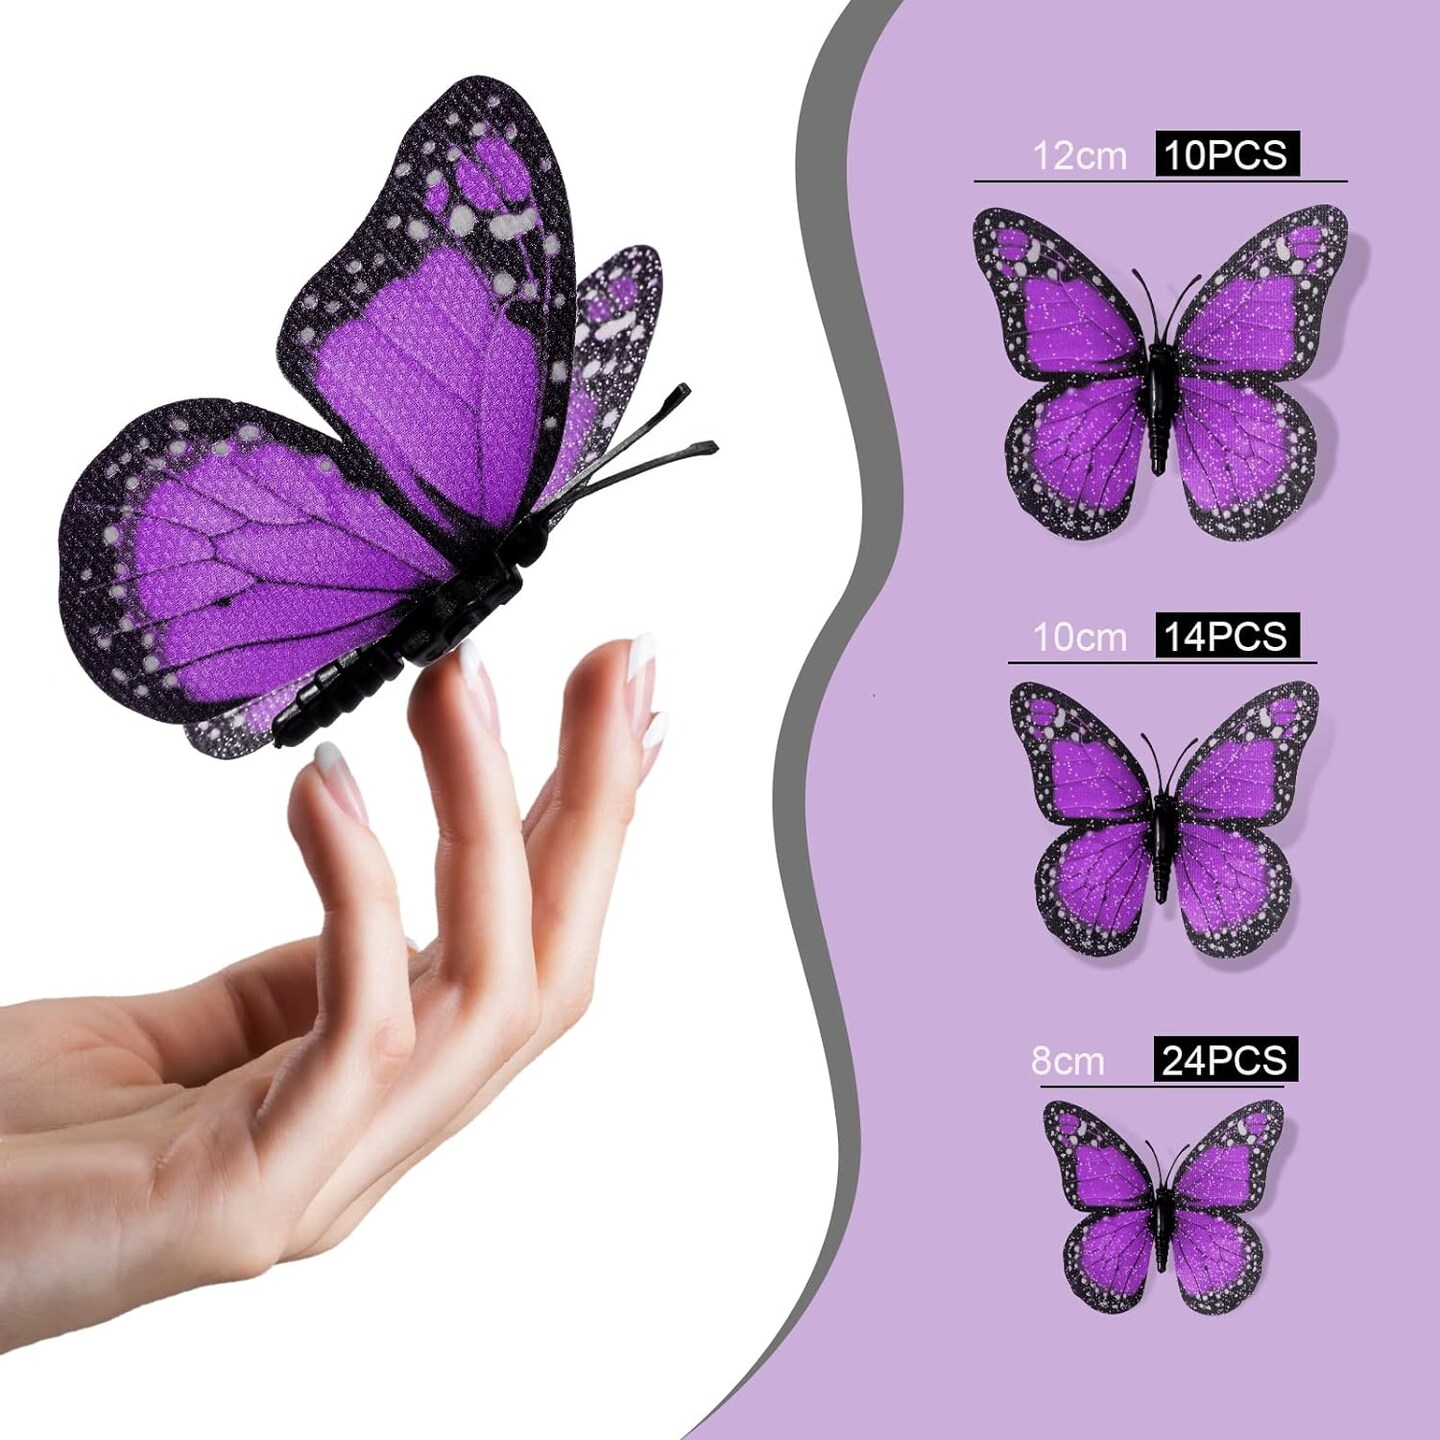 Decorative Floral Butterfly 48 Pack